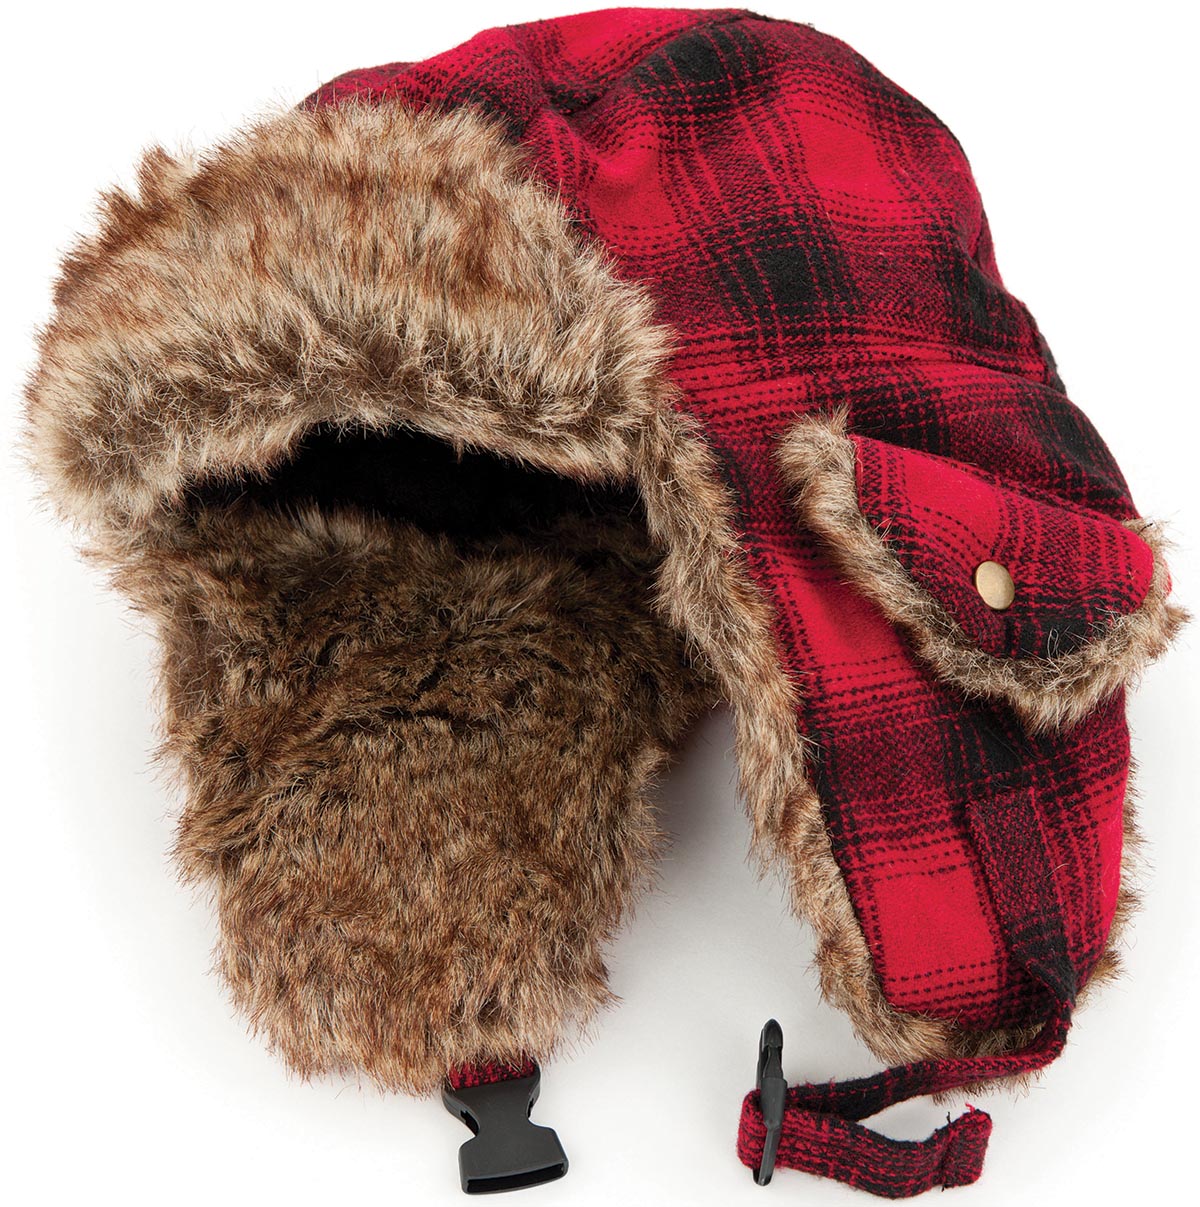 Scarlet and gray plaid winter hat